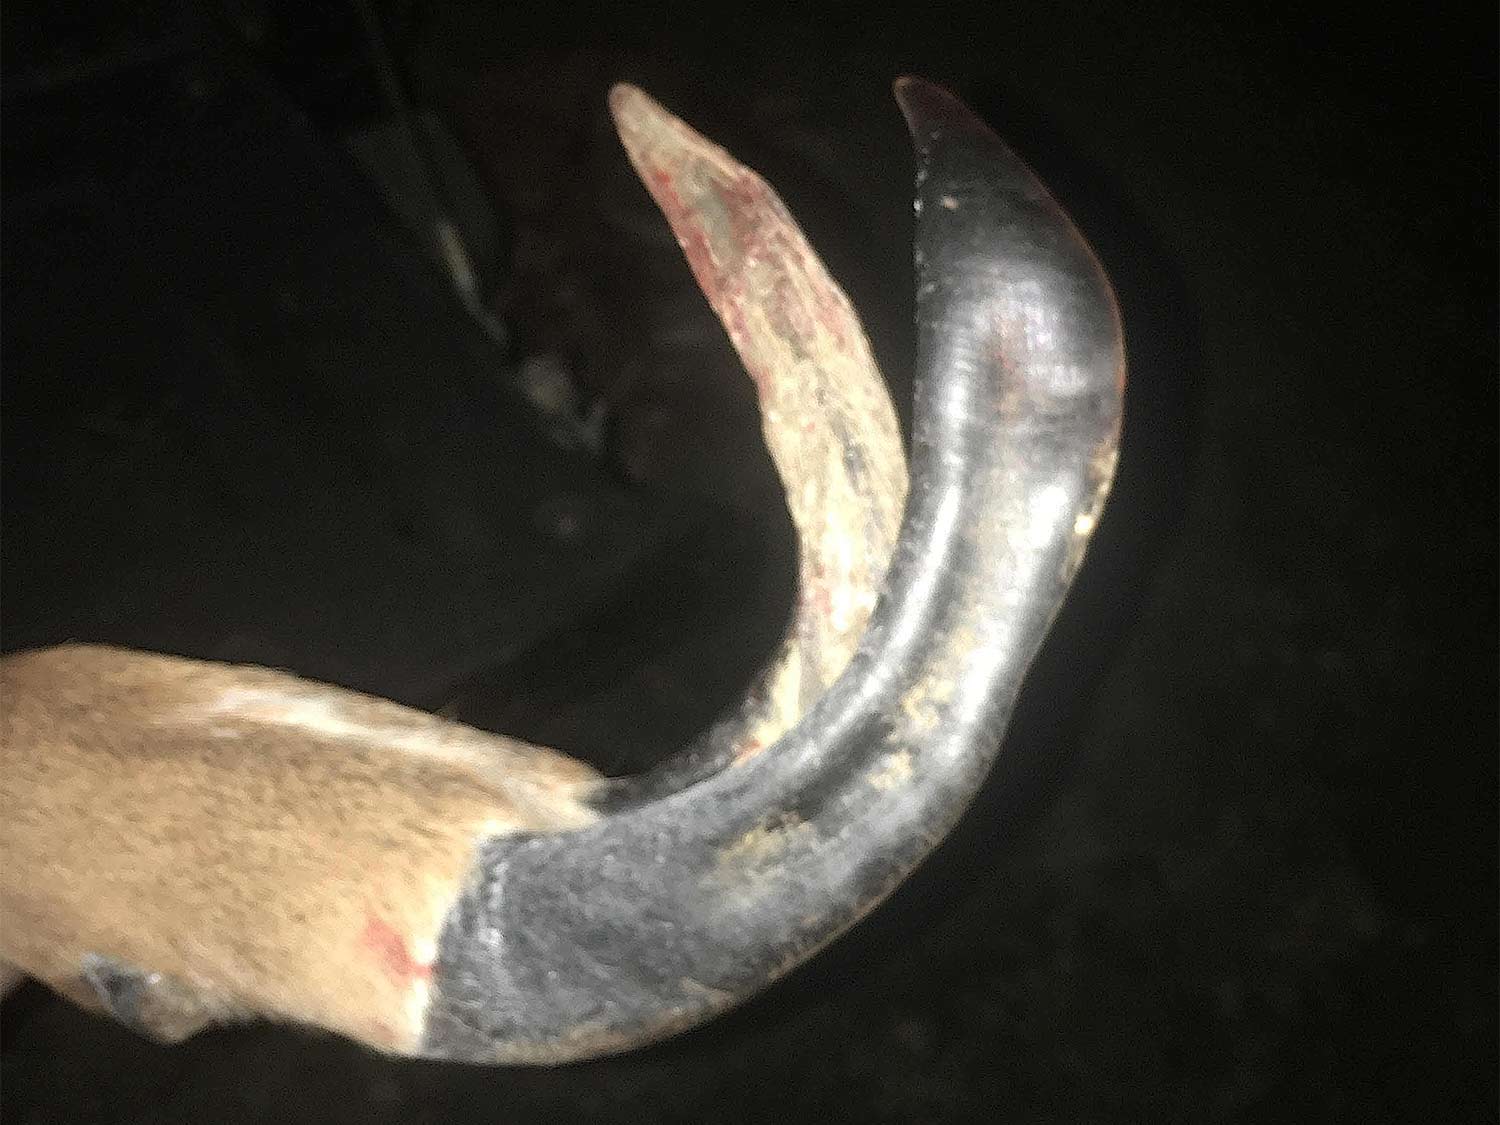 A deer foot with long hooves.